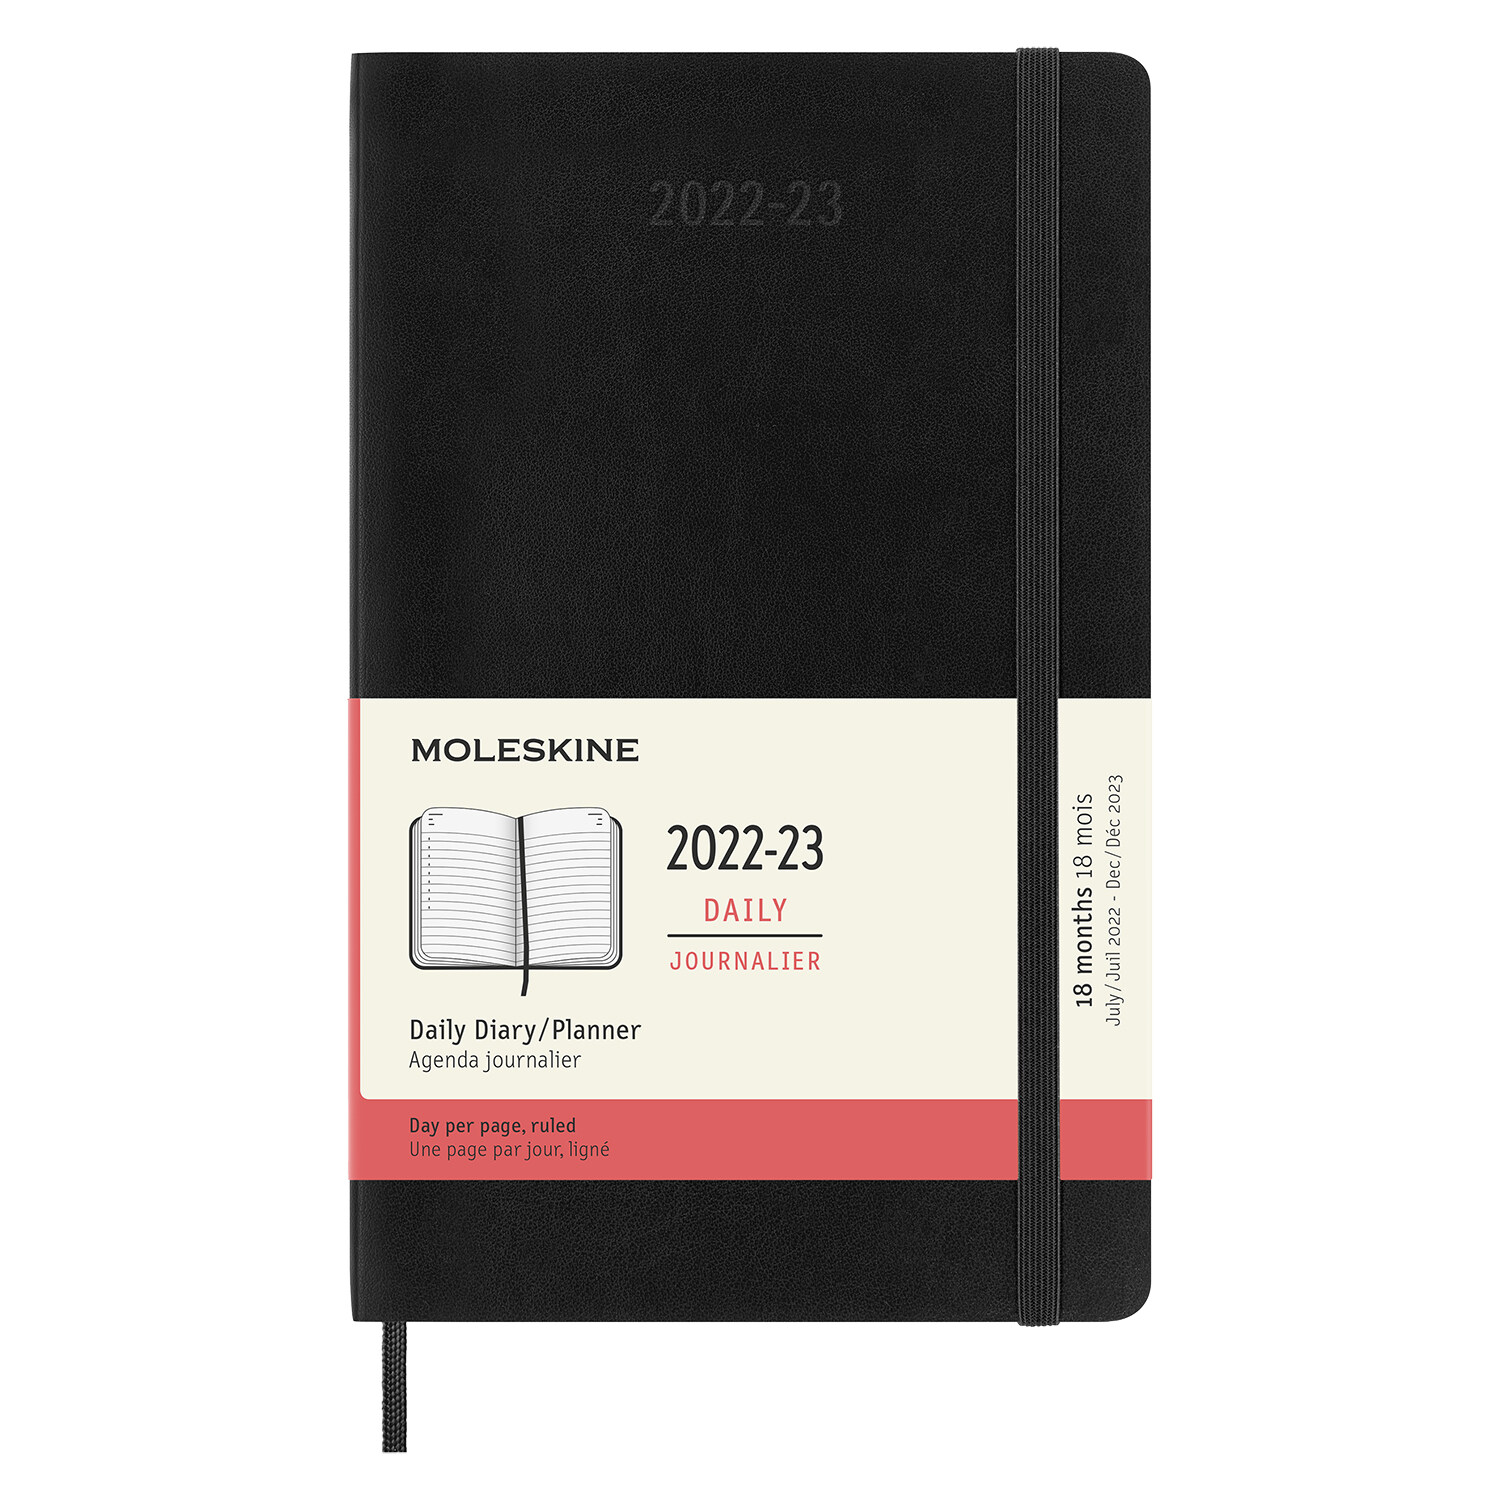 Moleskine 2023 Daily Planner, 18m, Large, Black, Soft Cover (5 X 8.25) (Other)